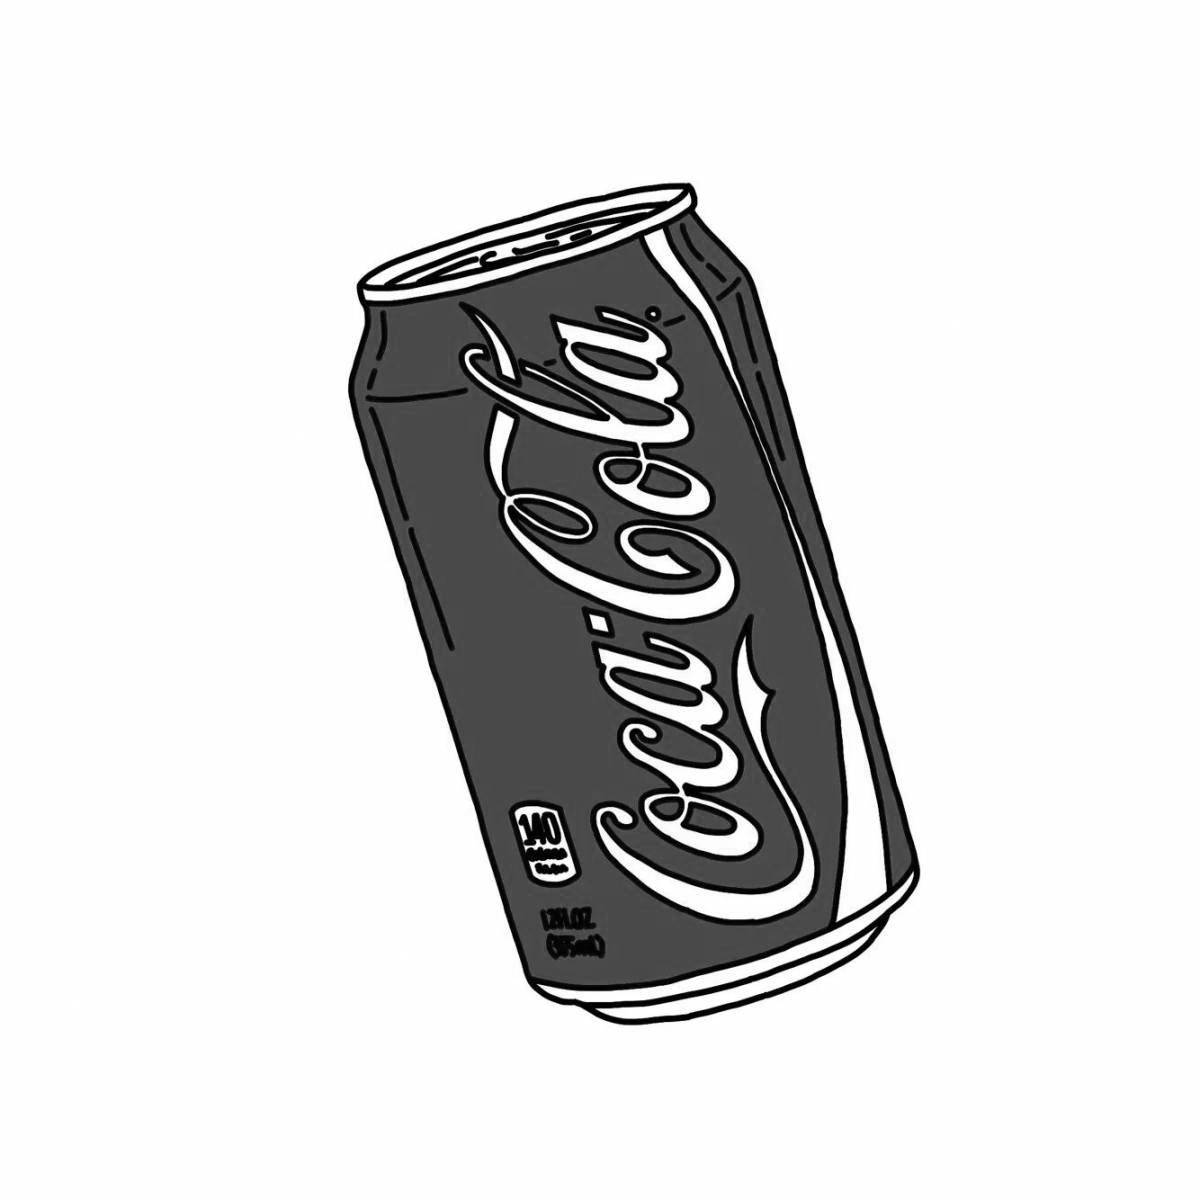 Fun coloring of cans of Coca-Cola